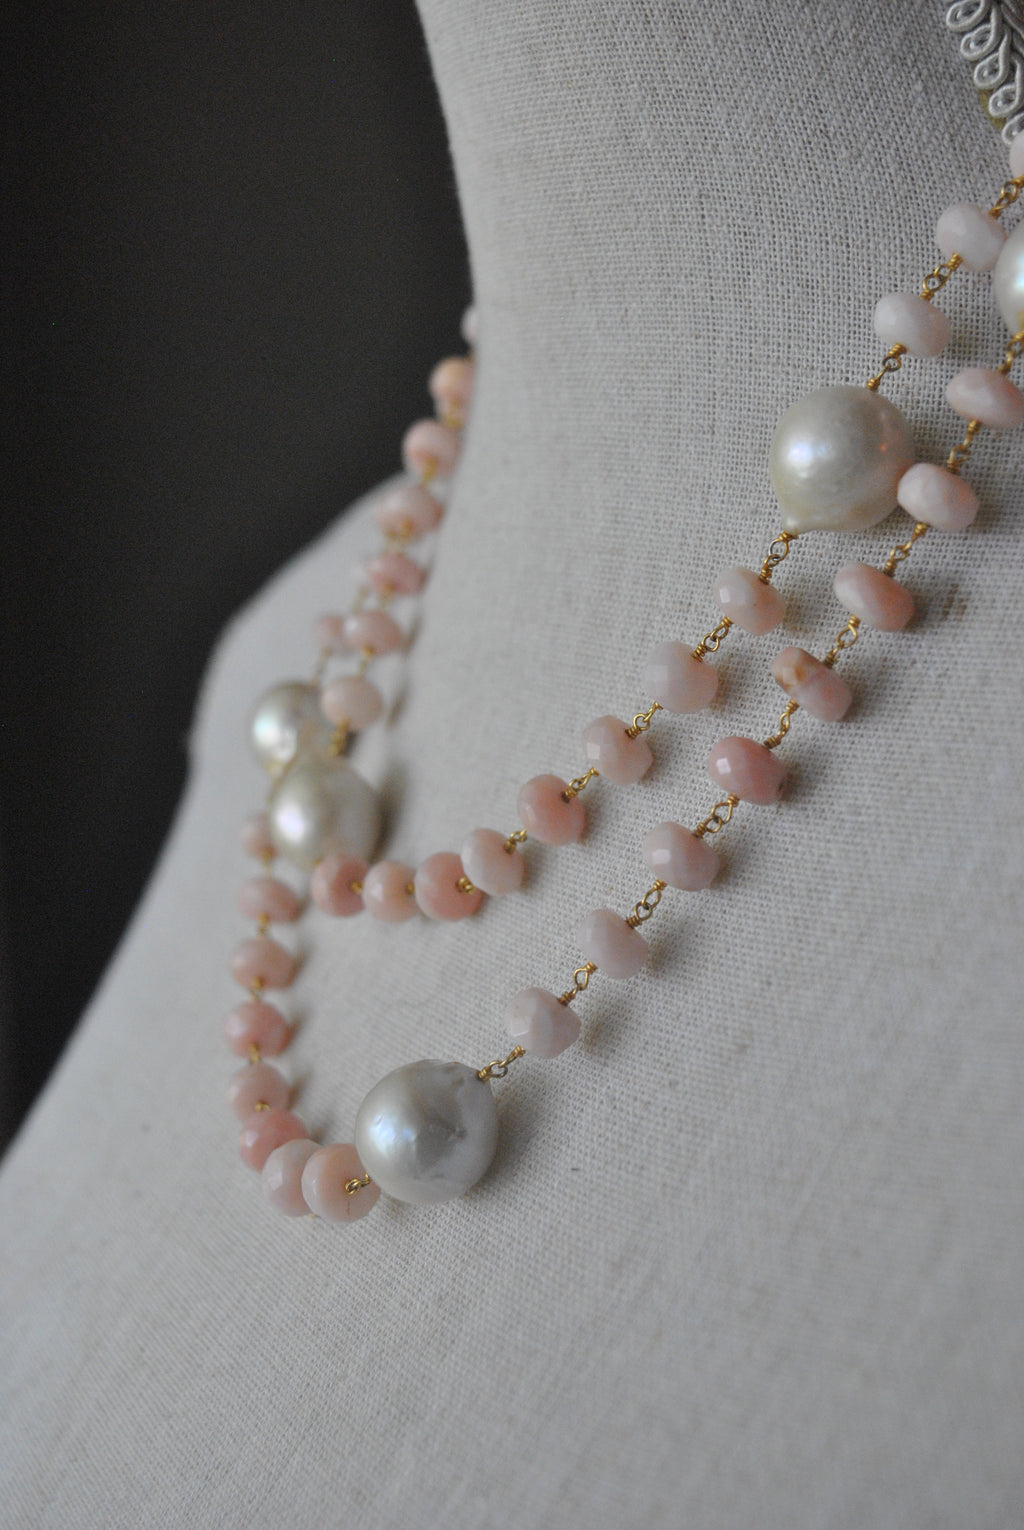 PINK PERUVIAN OPAL AND FRESHWATER PEARLS LONG NECKLACE